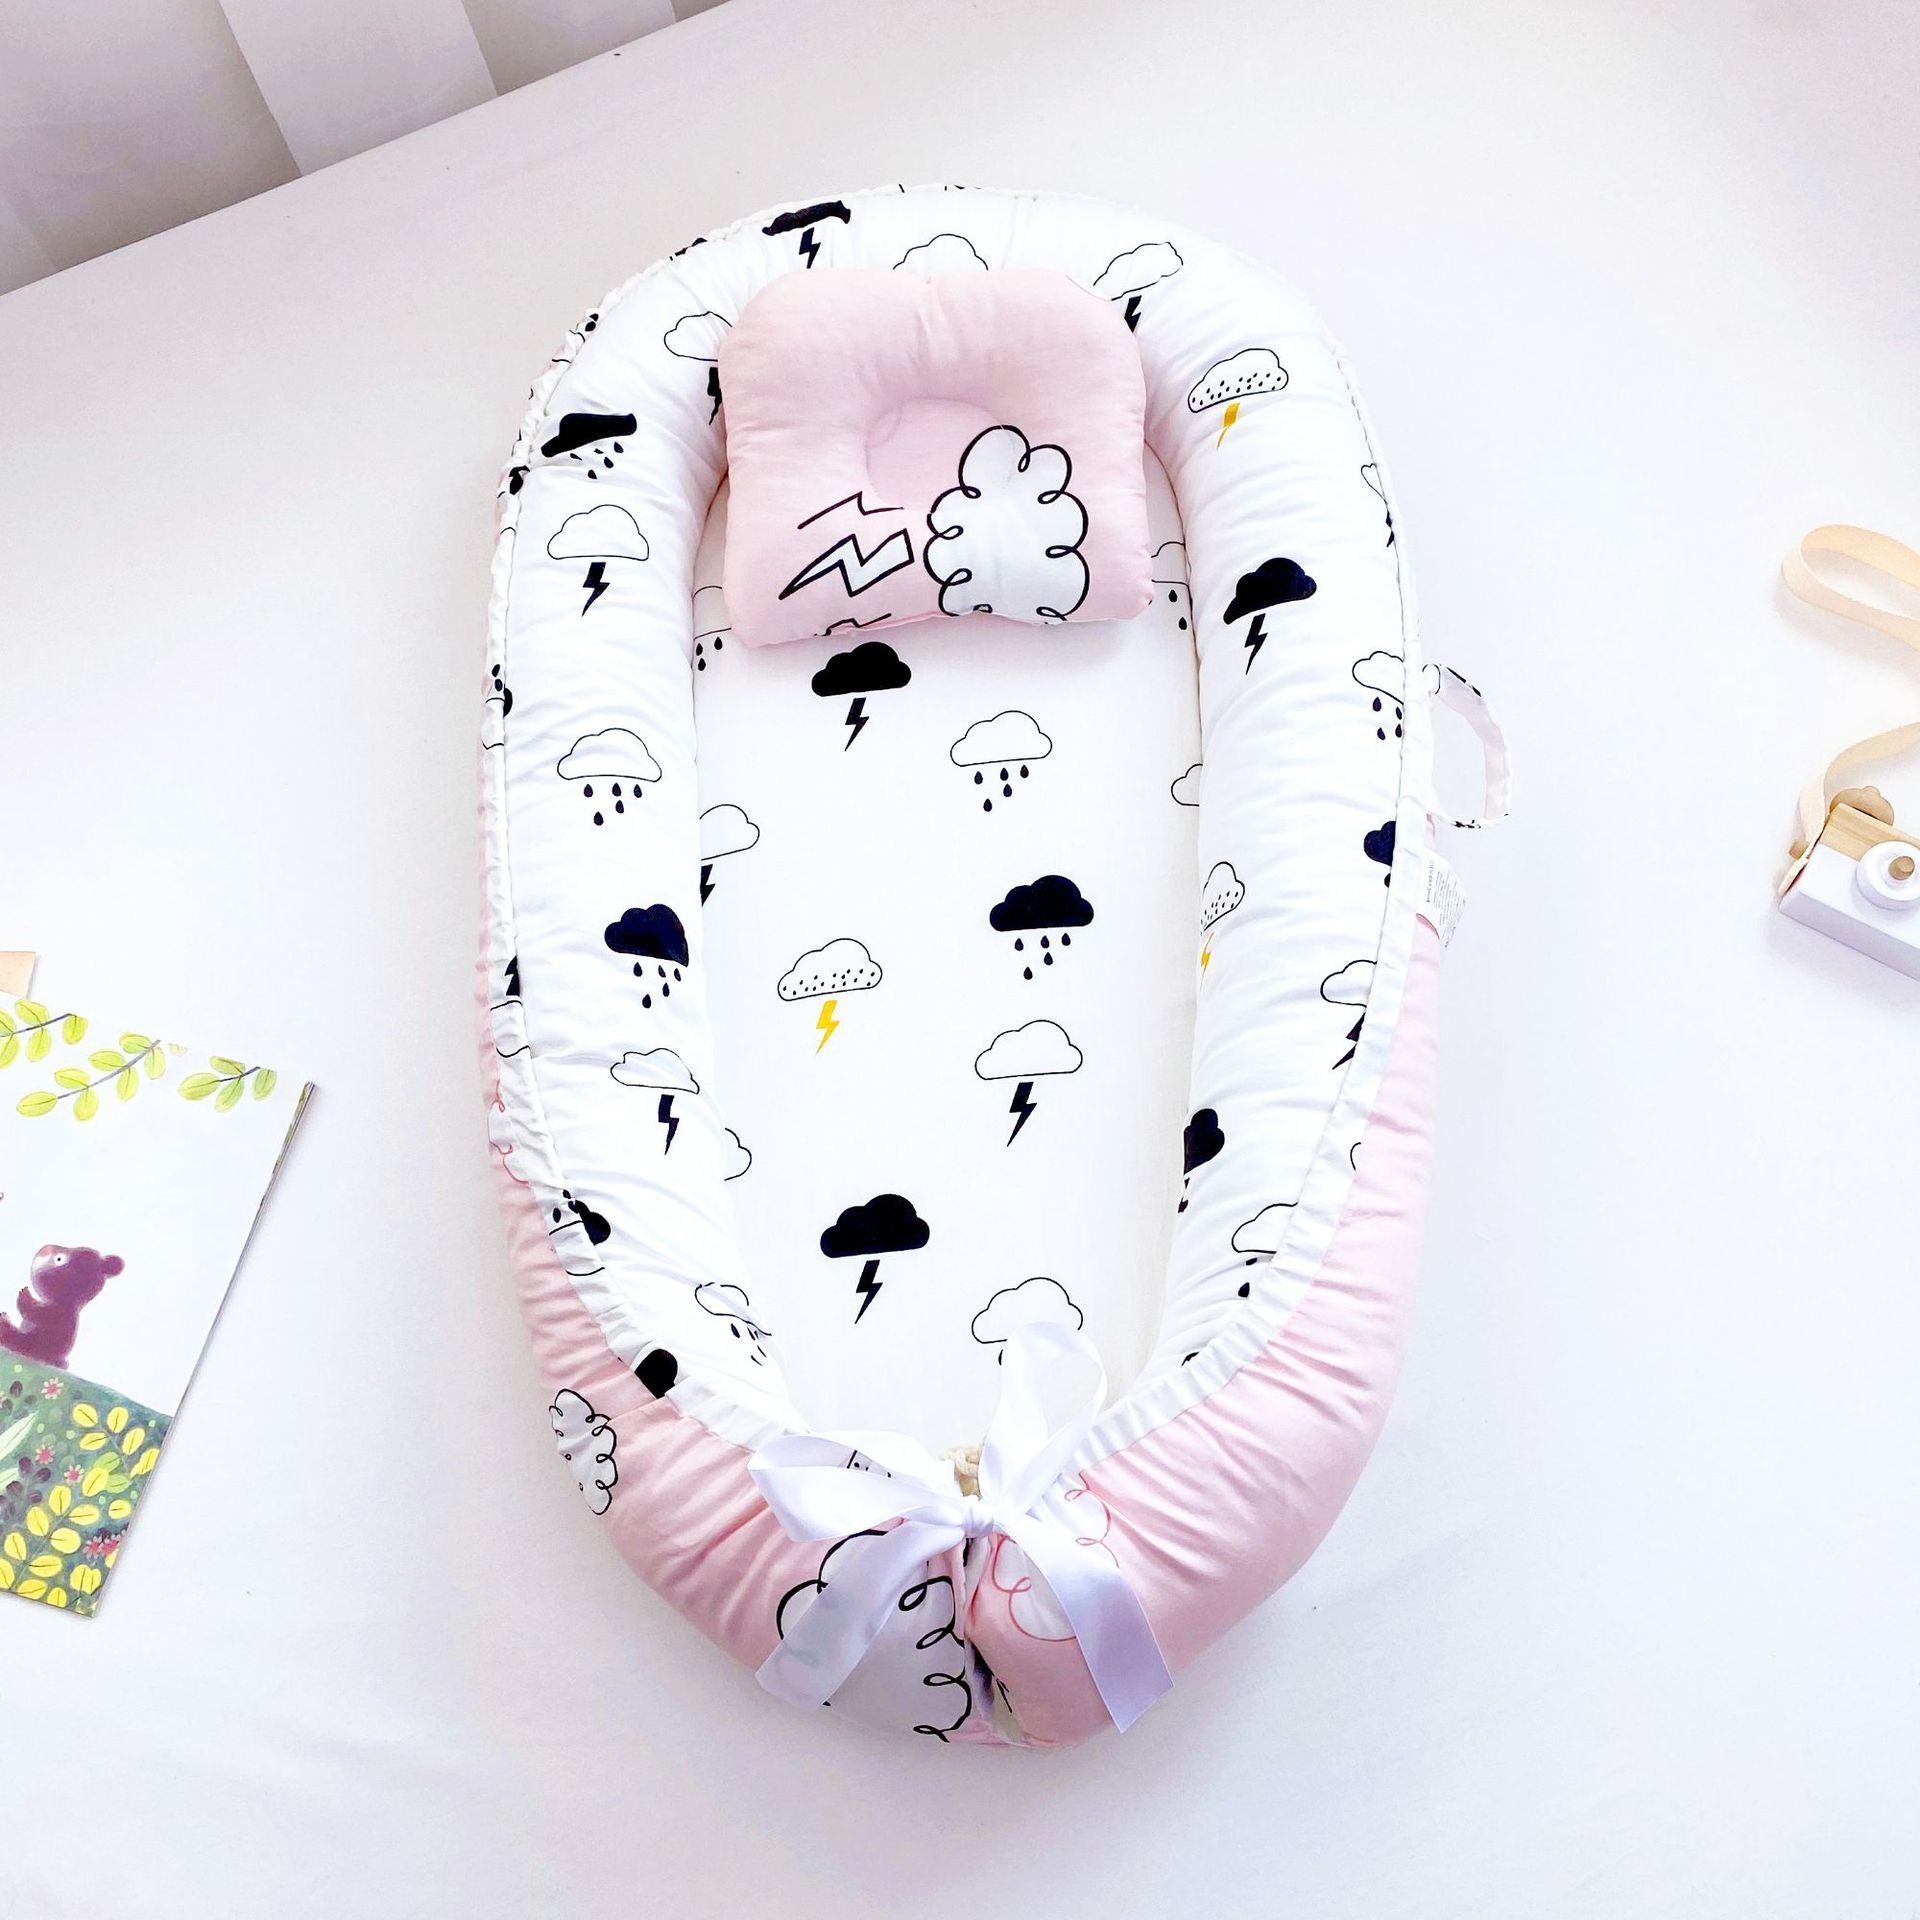 Pure Cotton Baby Nest Bed Portable Newborn Baby Bed